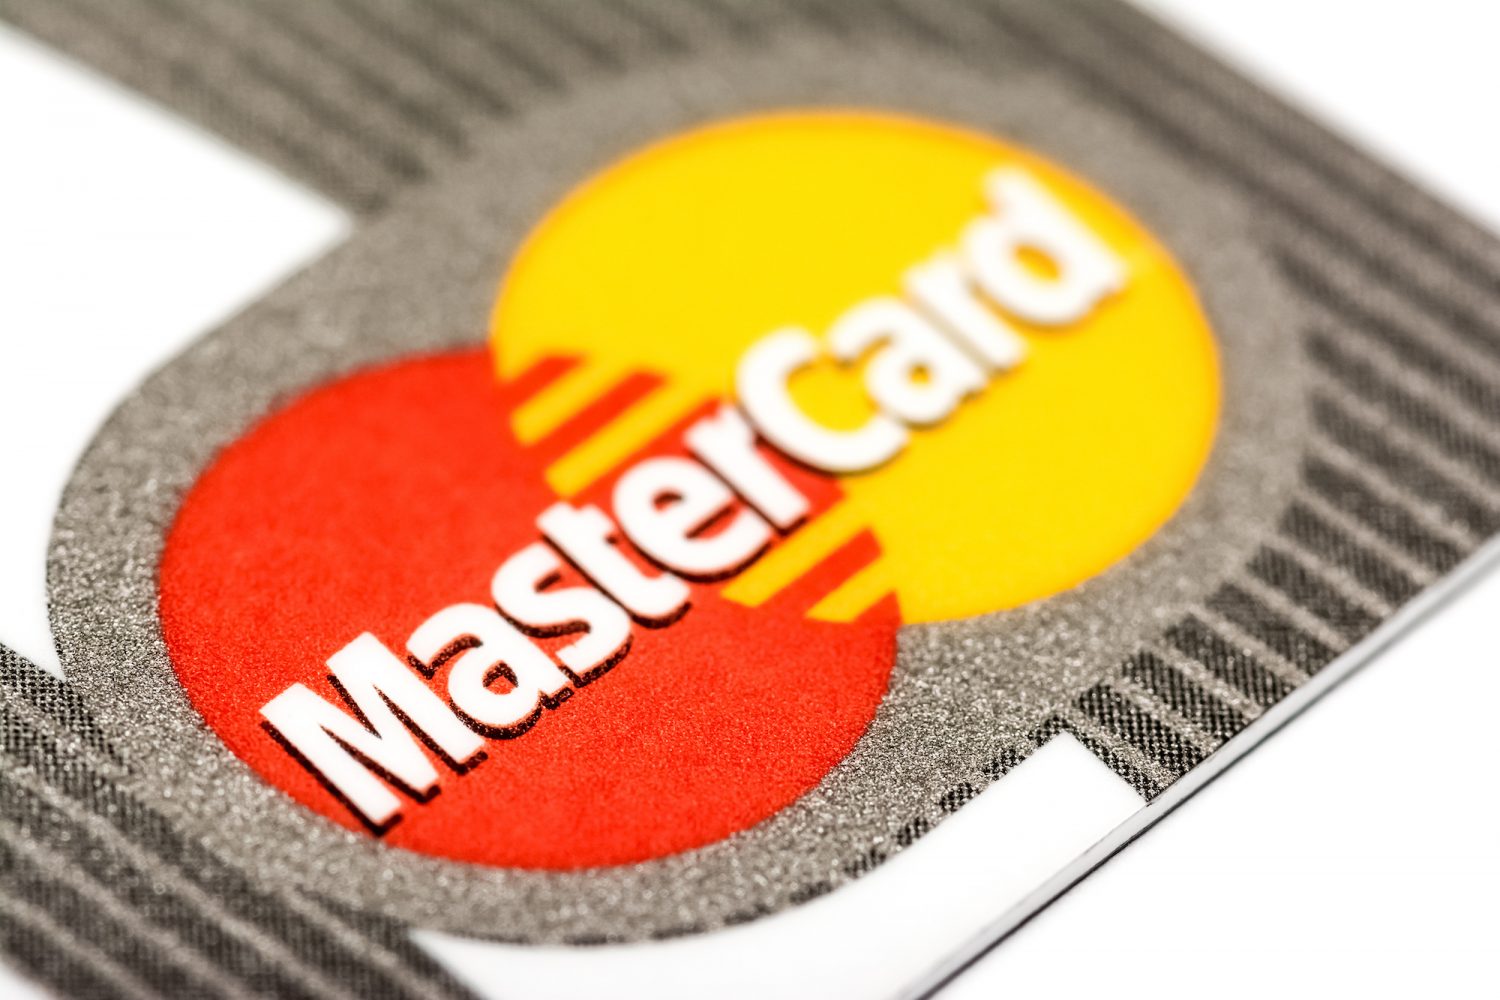 Mastercard To Tackle Fashion Fakes With Blockchain Tracking Solution